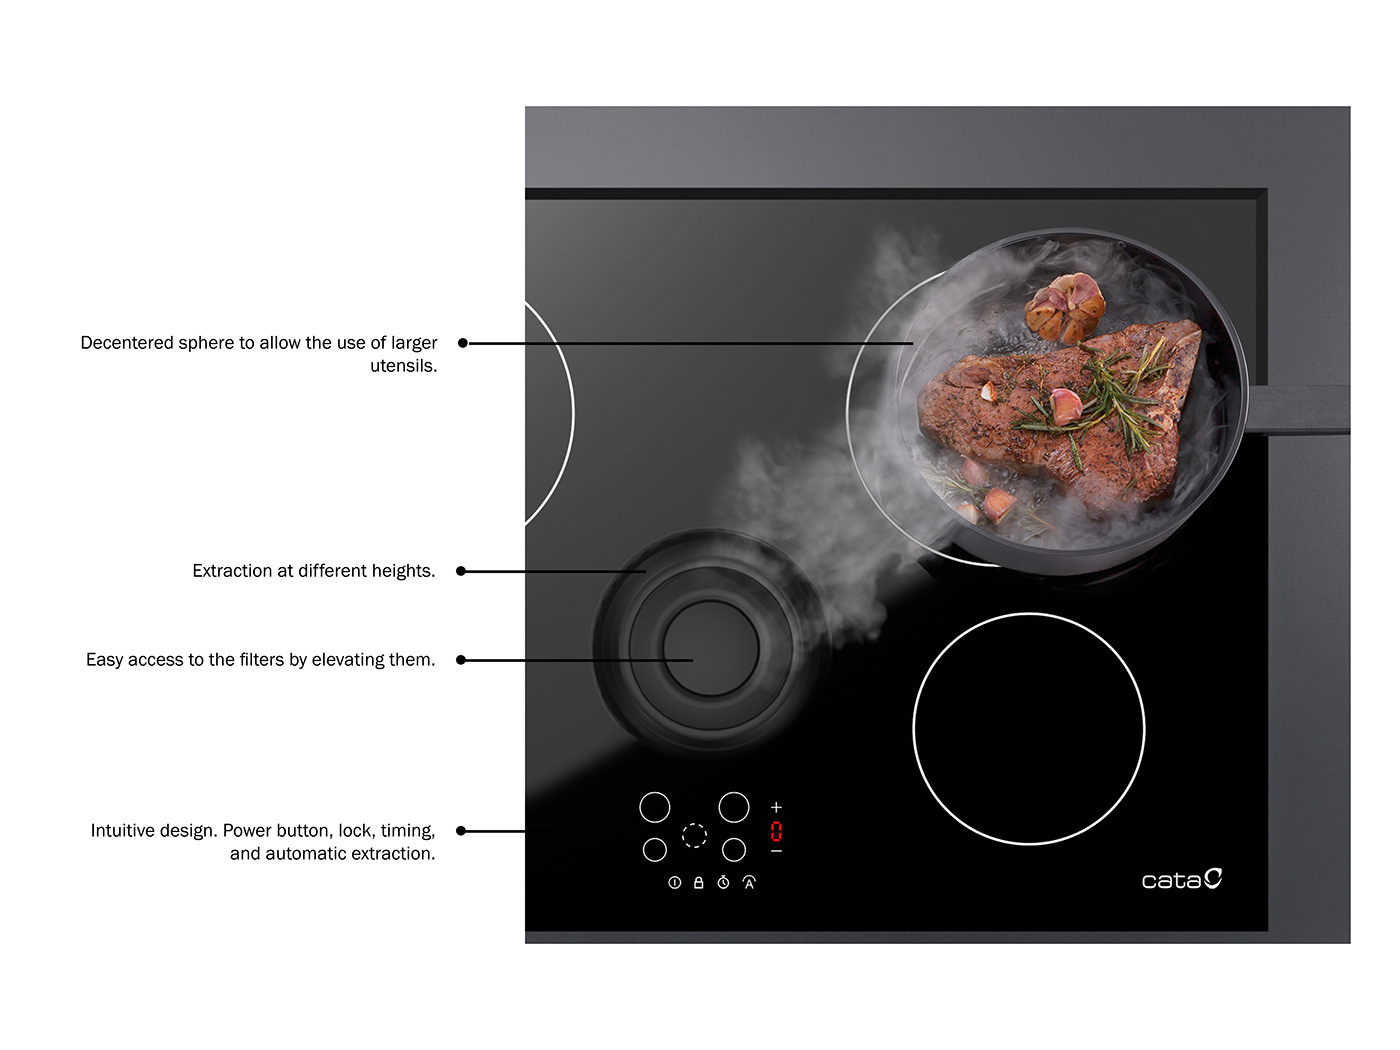 cooking induction cooker induction cooktop kitchen